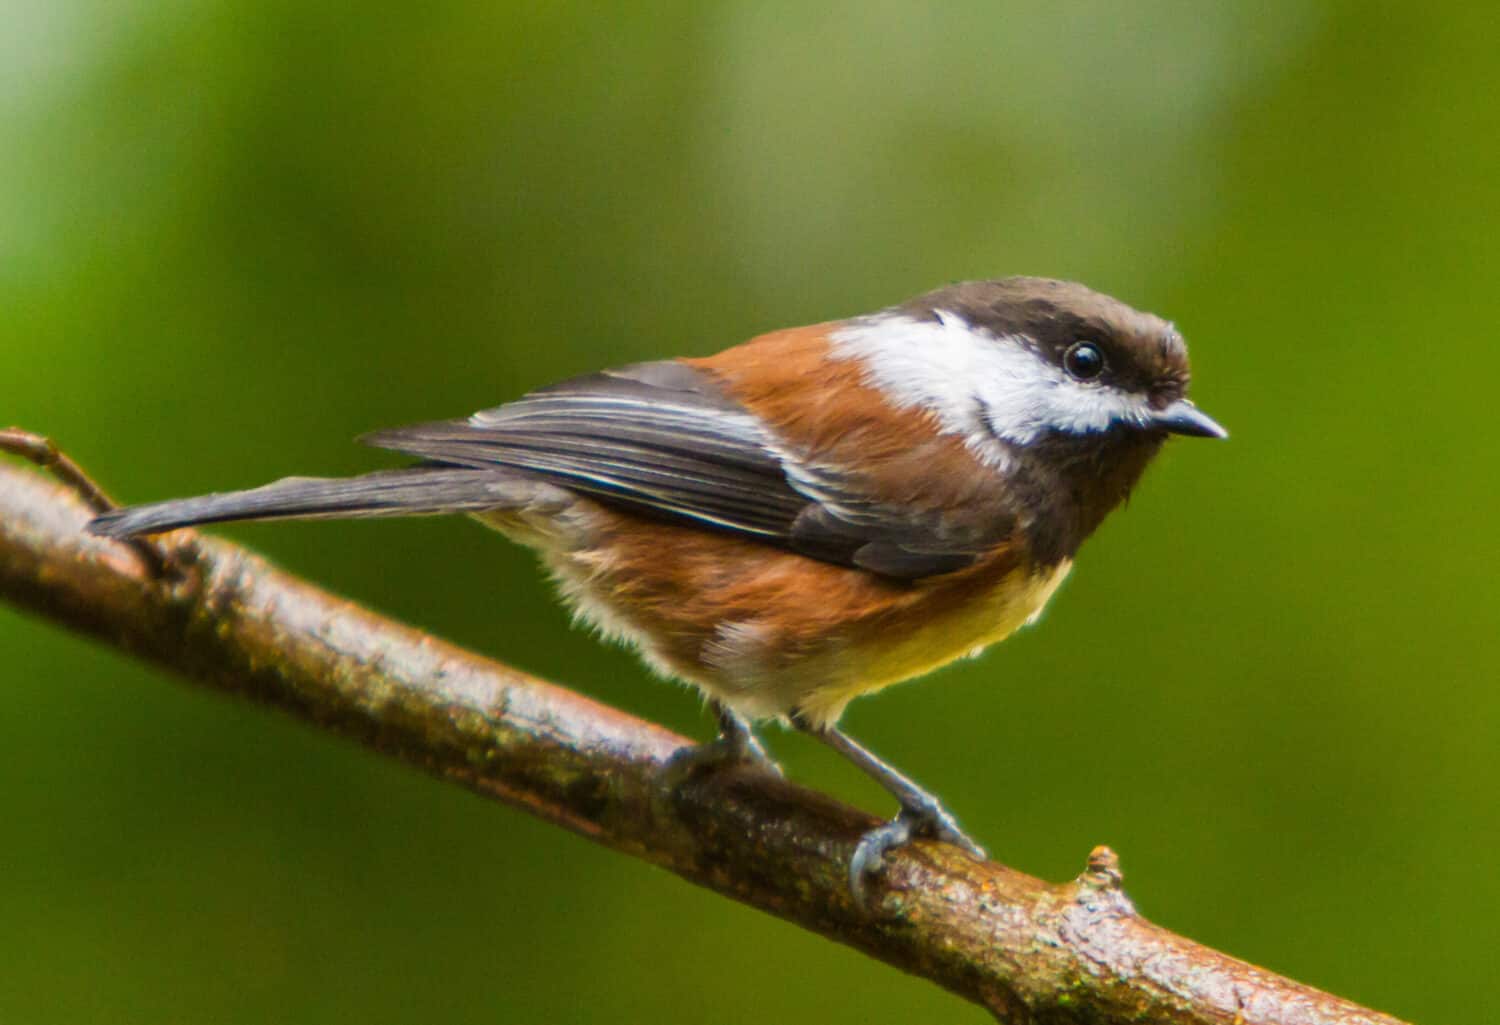 A Chestnut-backed Chickadee perched on a branch